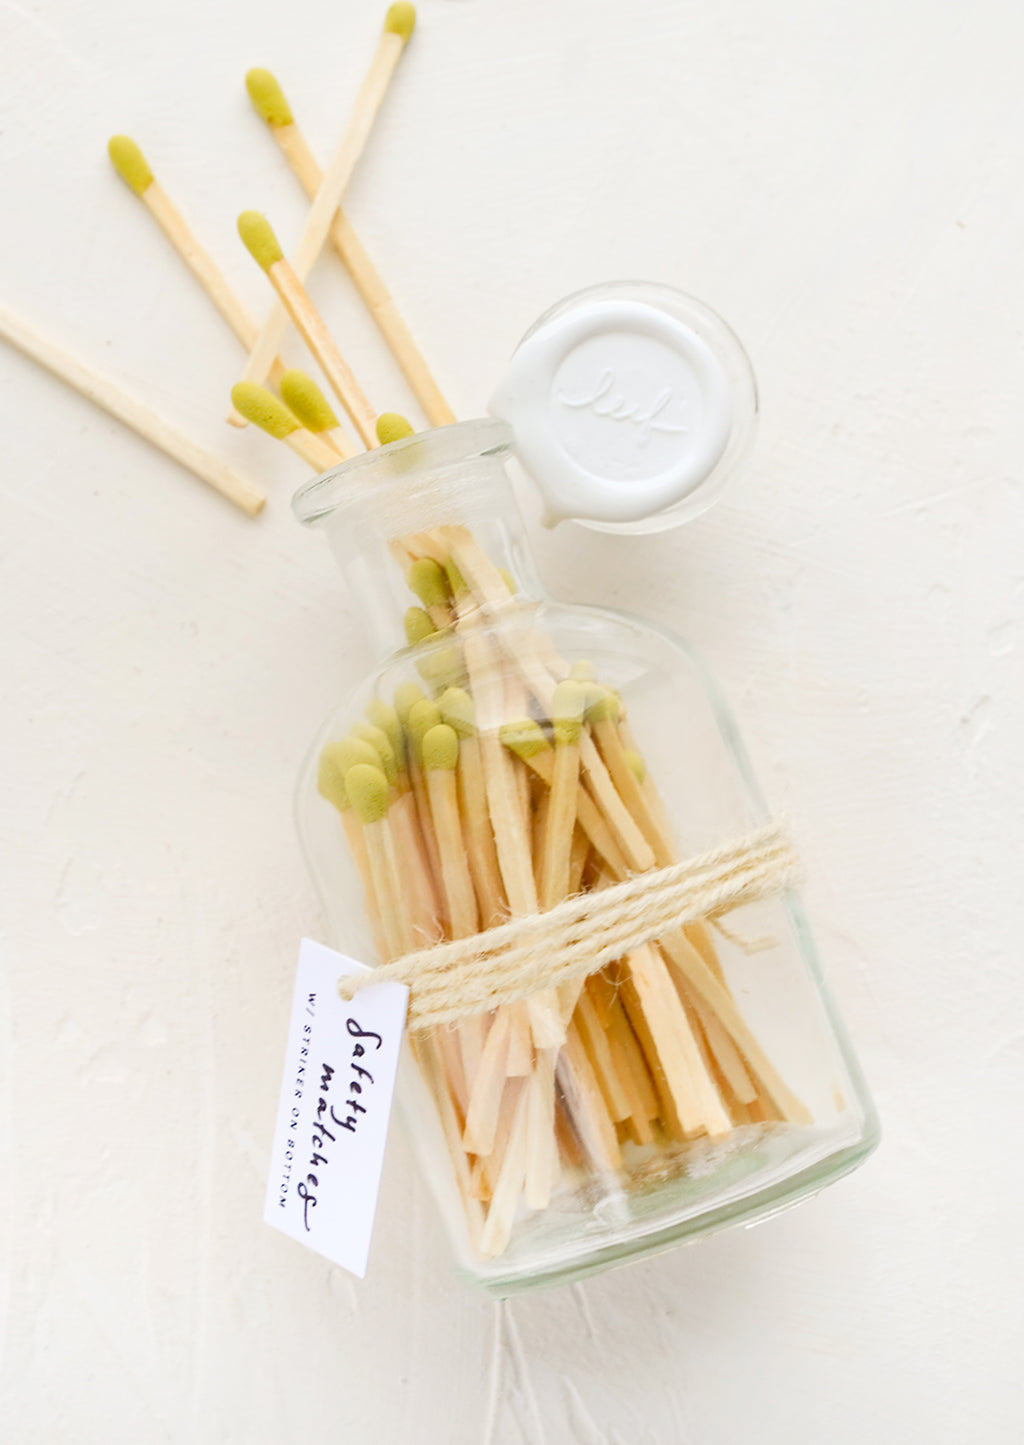 Citron: Safety matches with lime green tips in a vintage-style glass apothecary jar with white wax seal on lid.